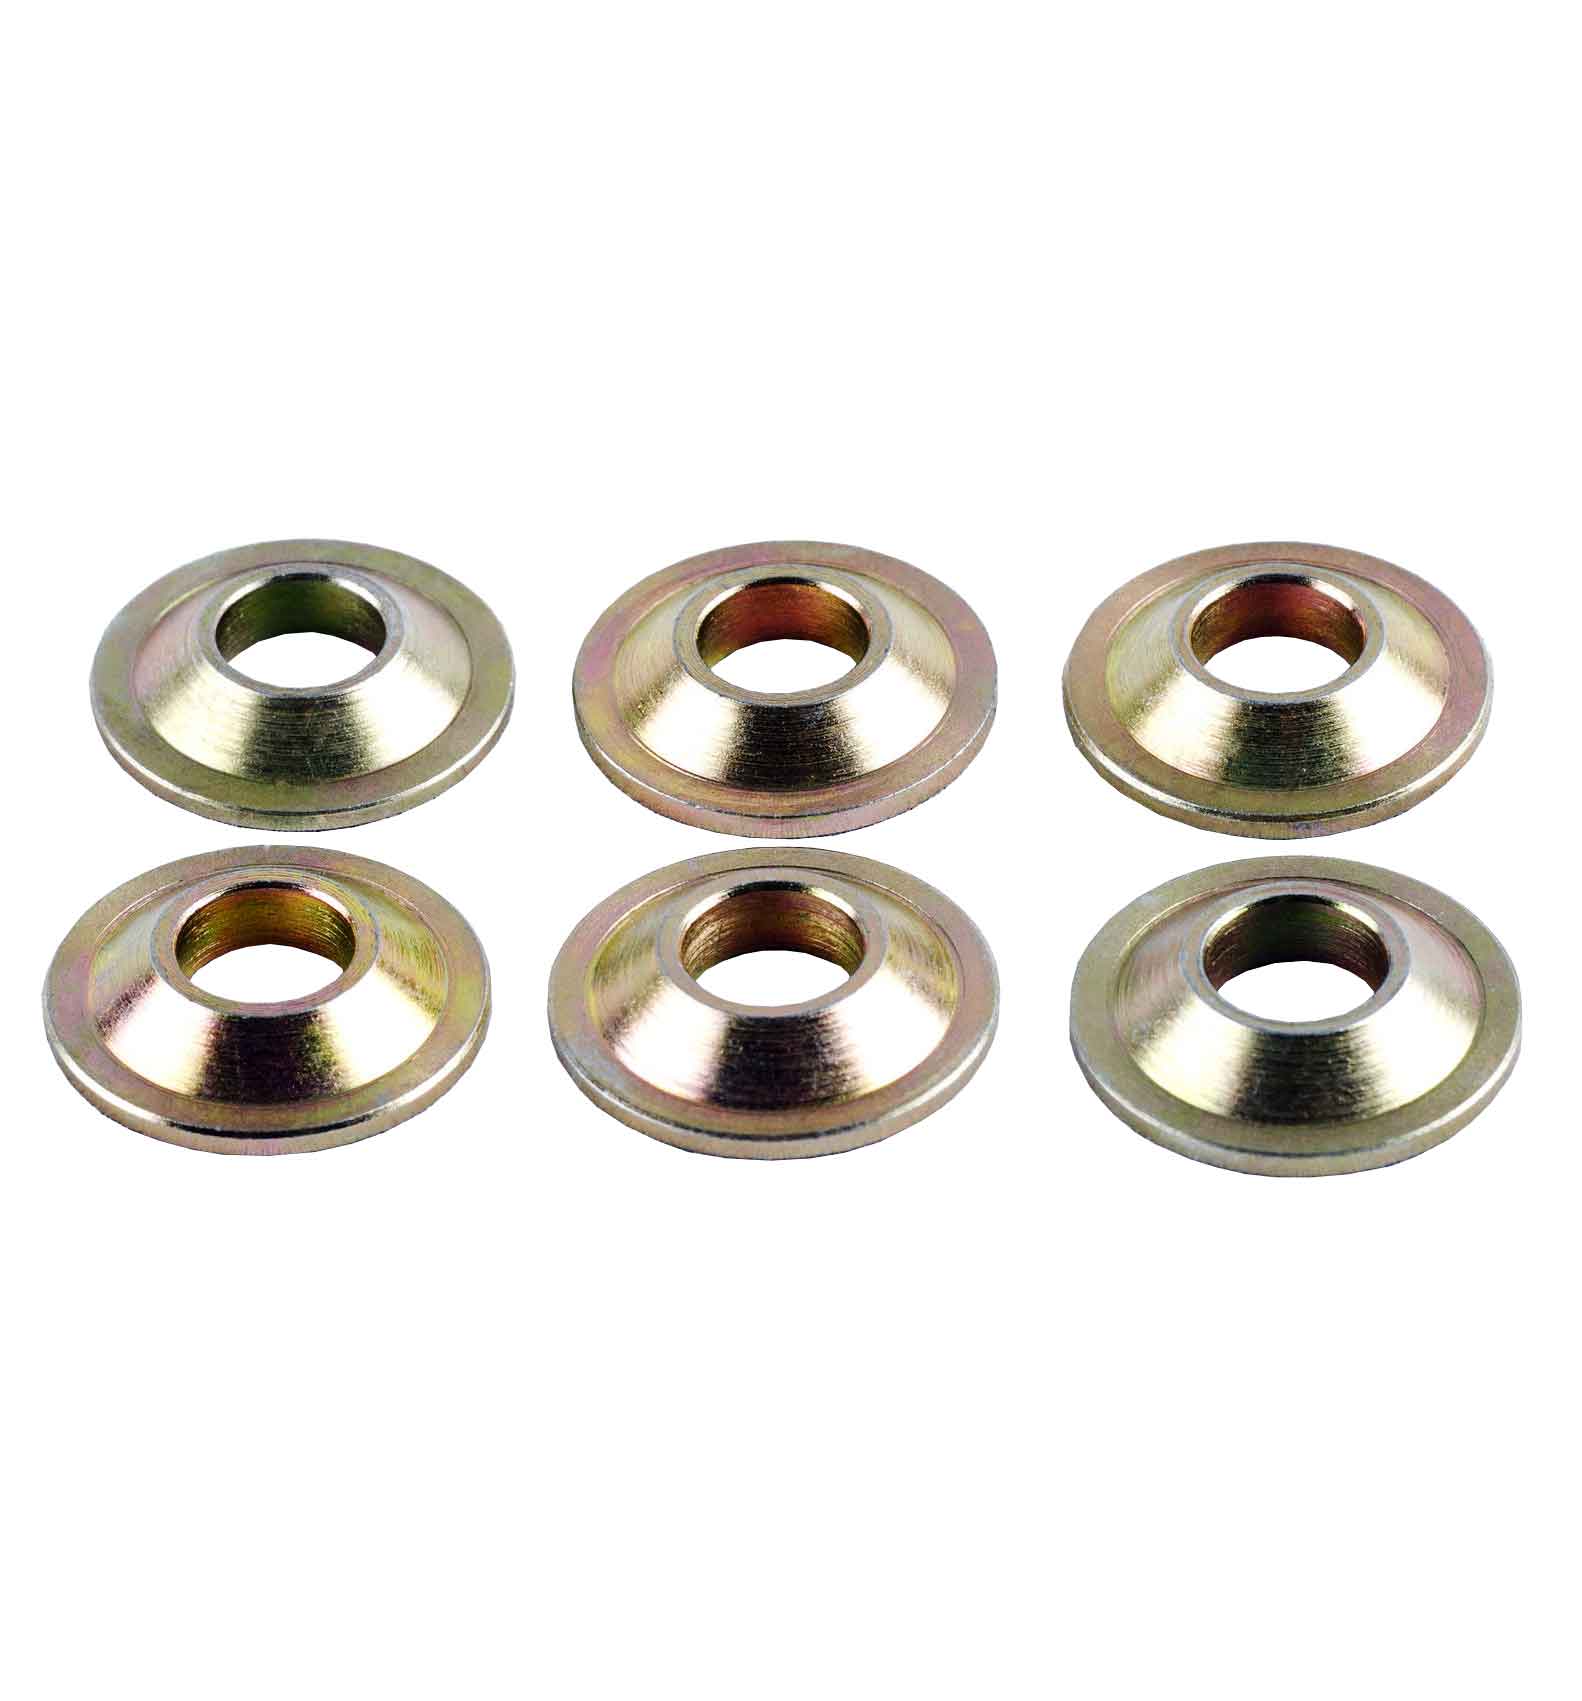 7/16" Rose Joint Misalignment Spacers (Pack of 6)